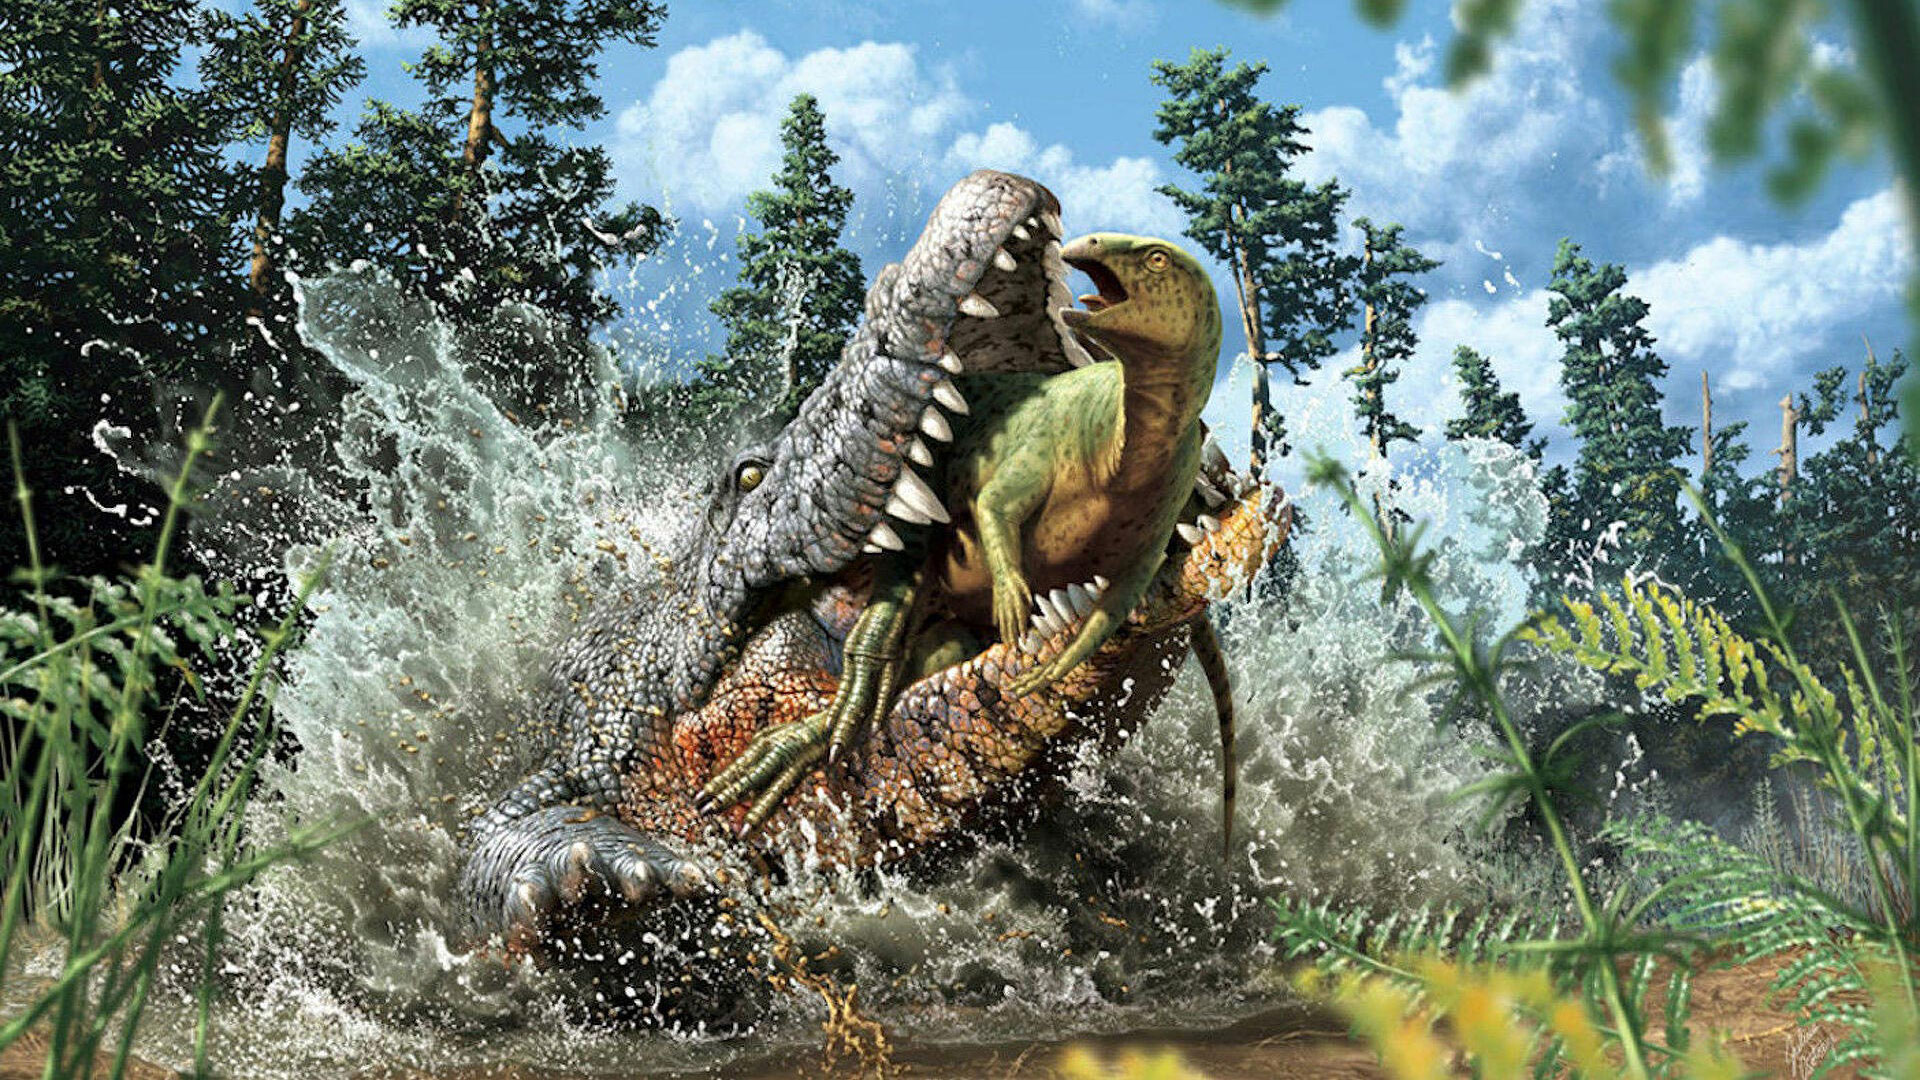 Scientists discovered fossils of a 93-million-year-old crocodile with a baby dinosaur in stomach thumbnail